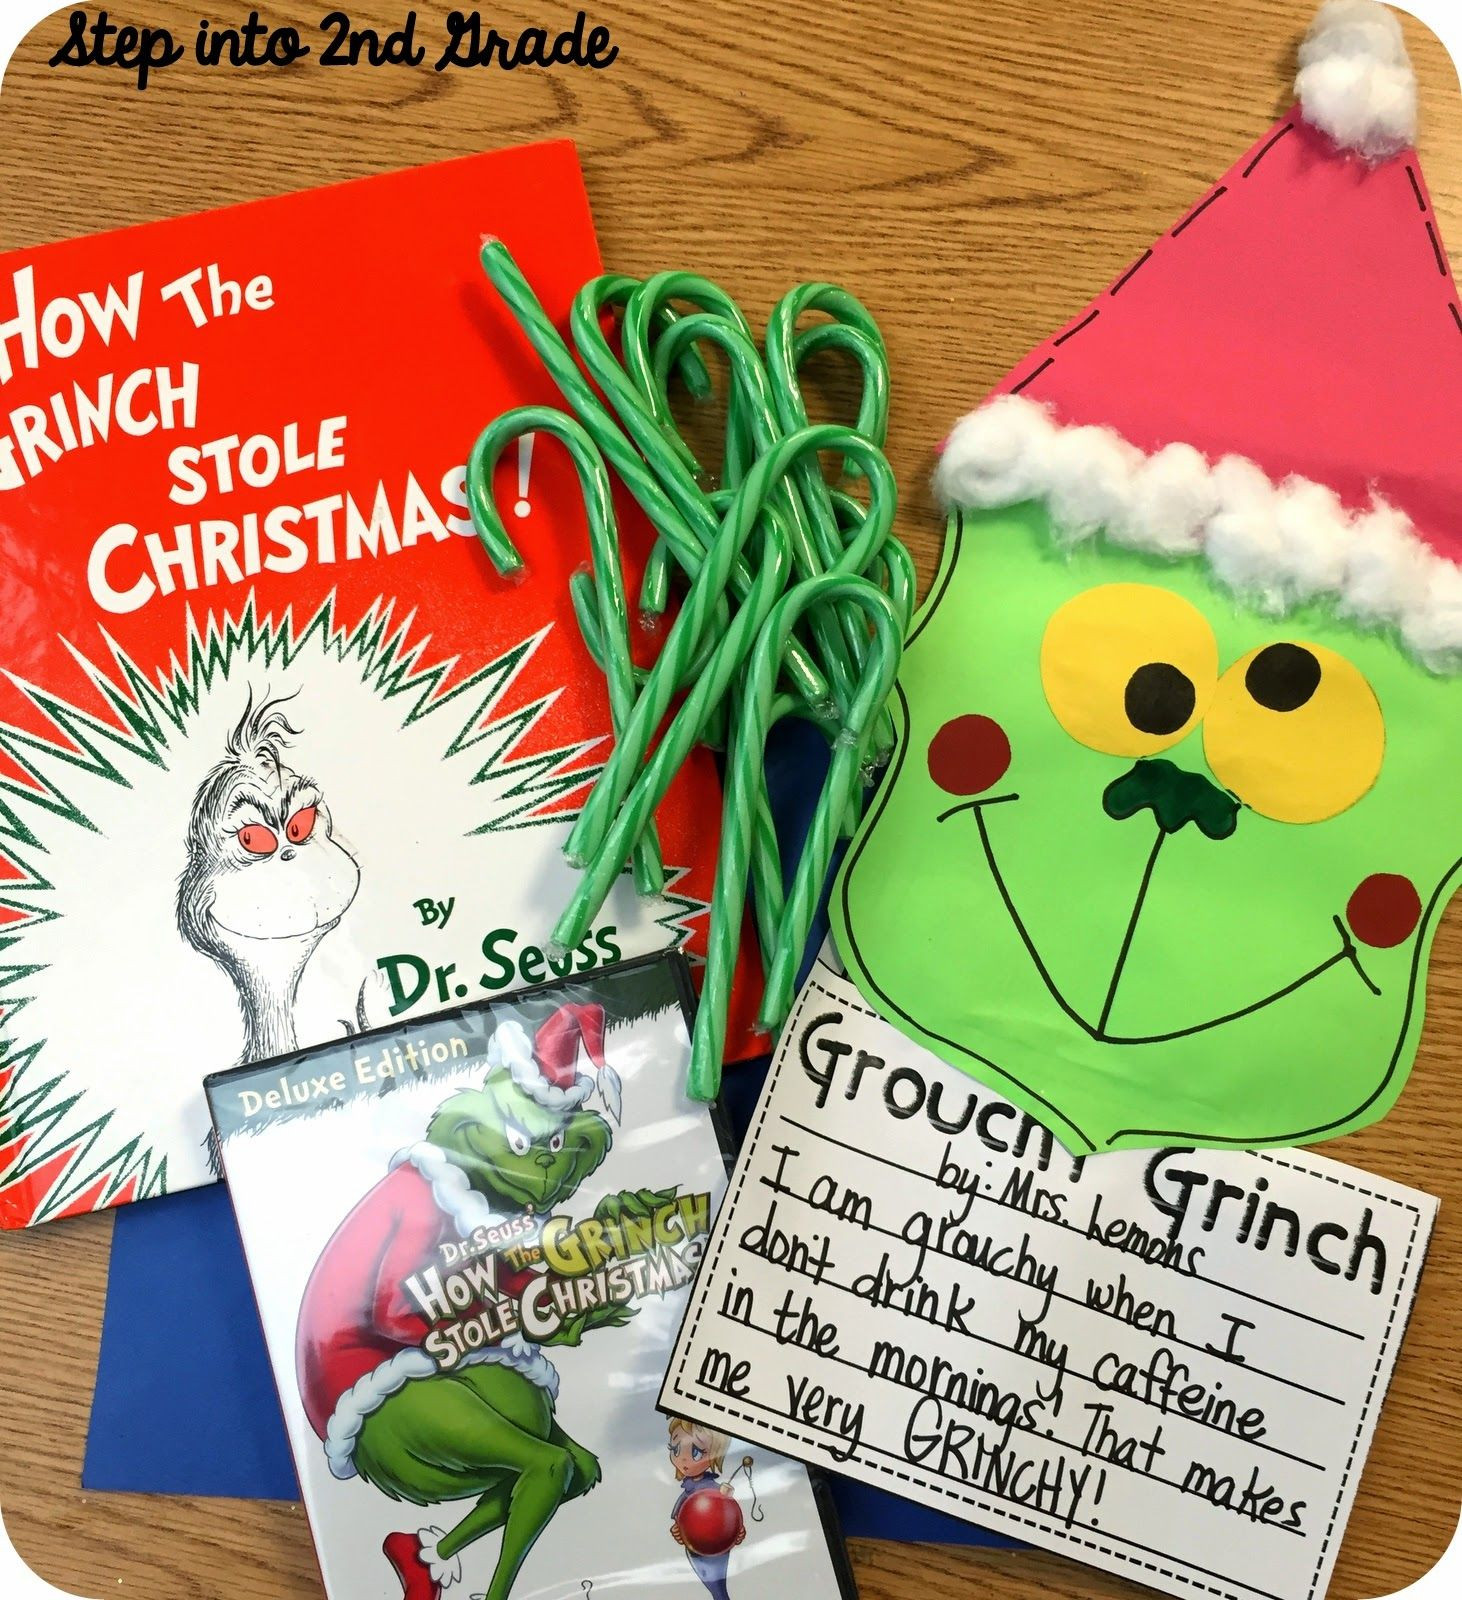 2Nd Grade Holiday Party Ideas
 Step into 2nd Grade with Mrs Lemons A Whole Lotta